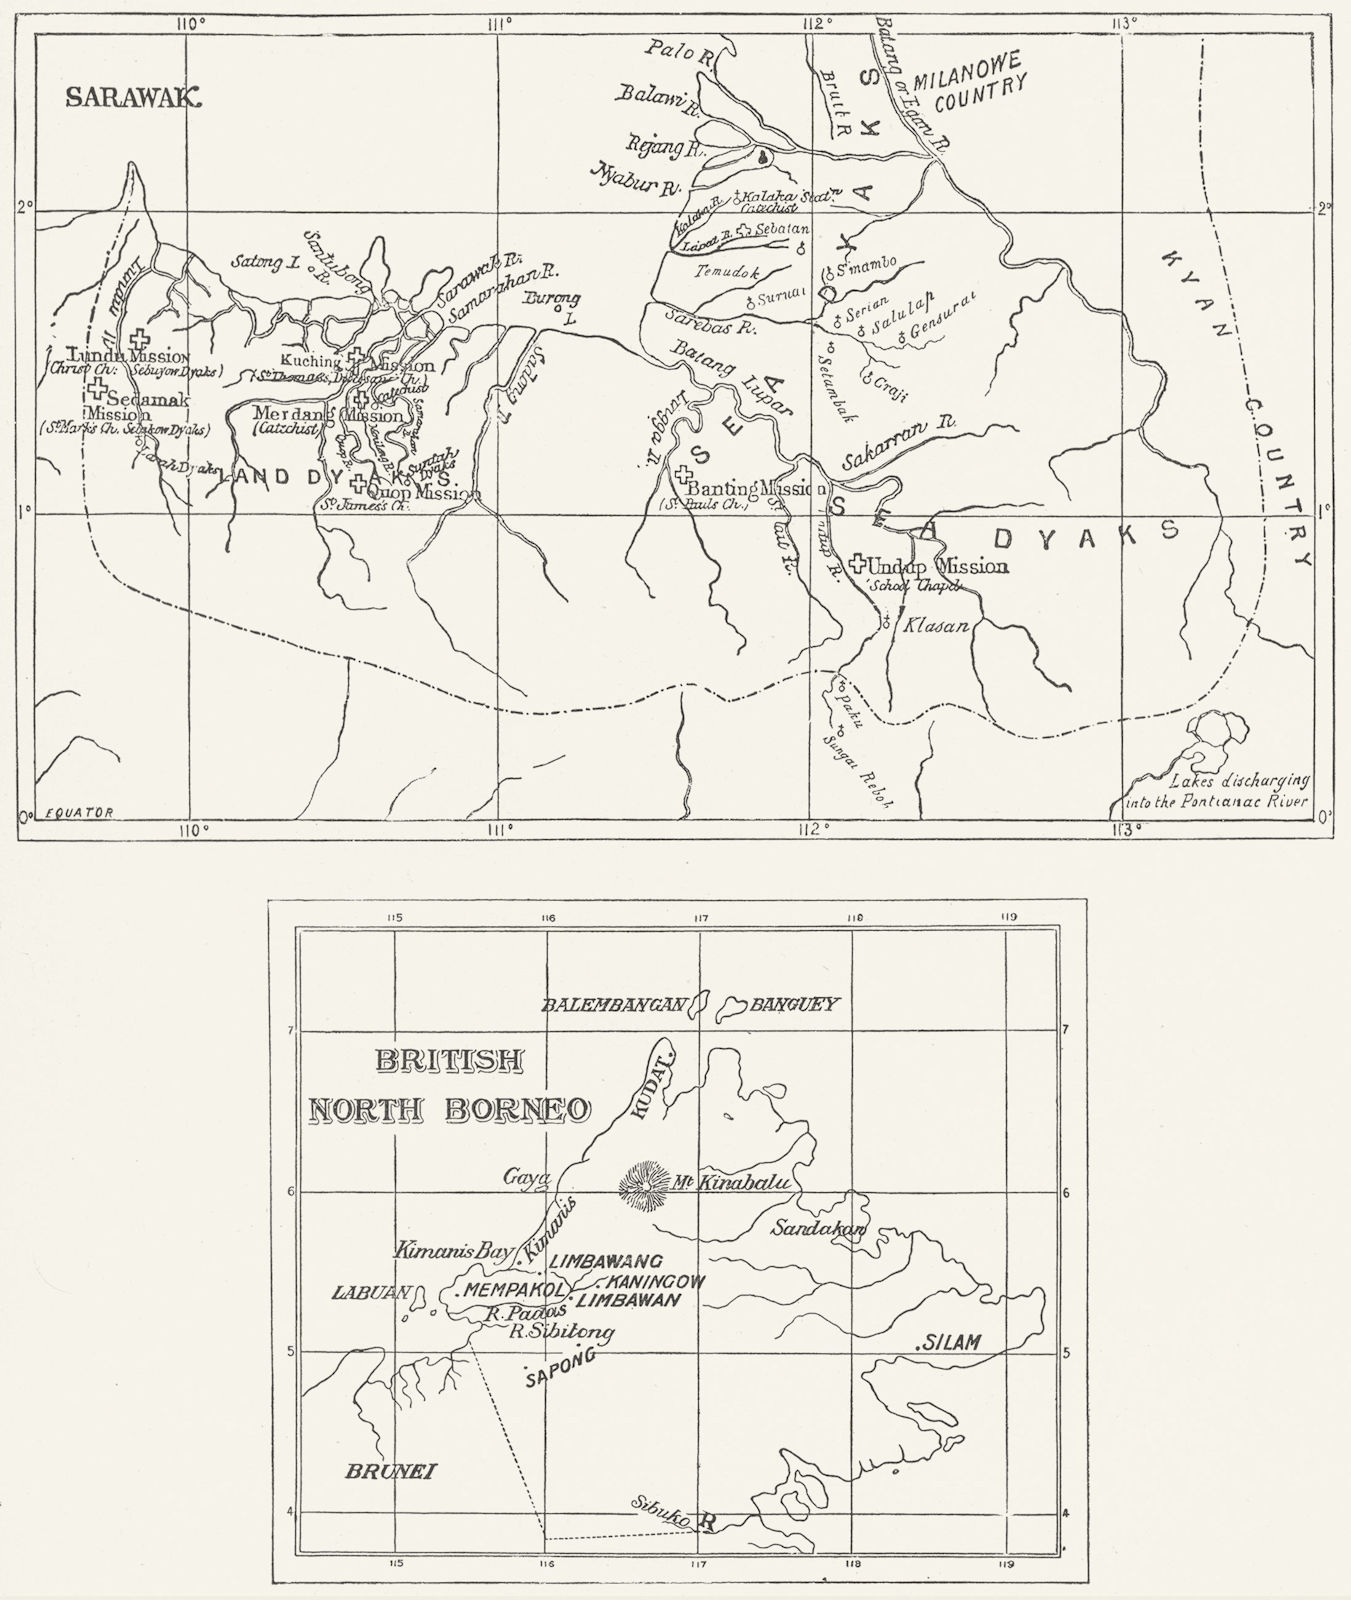 Associate Product BORNEO ANGLICAN CHURCH MISSIONS. Sarawak Sabah Protestant. Malaysia 1897 map